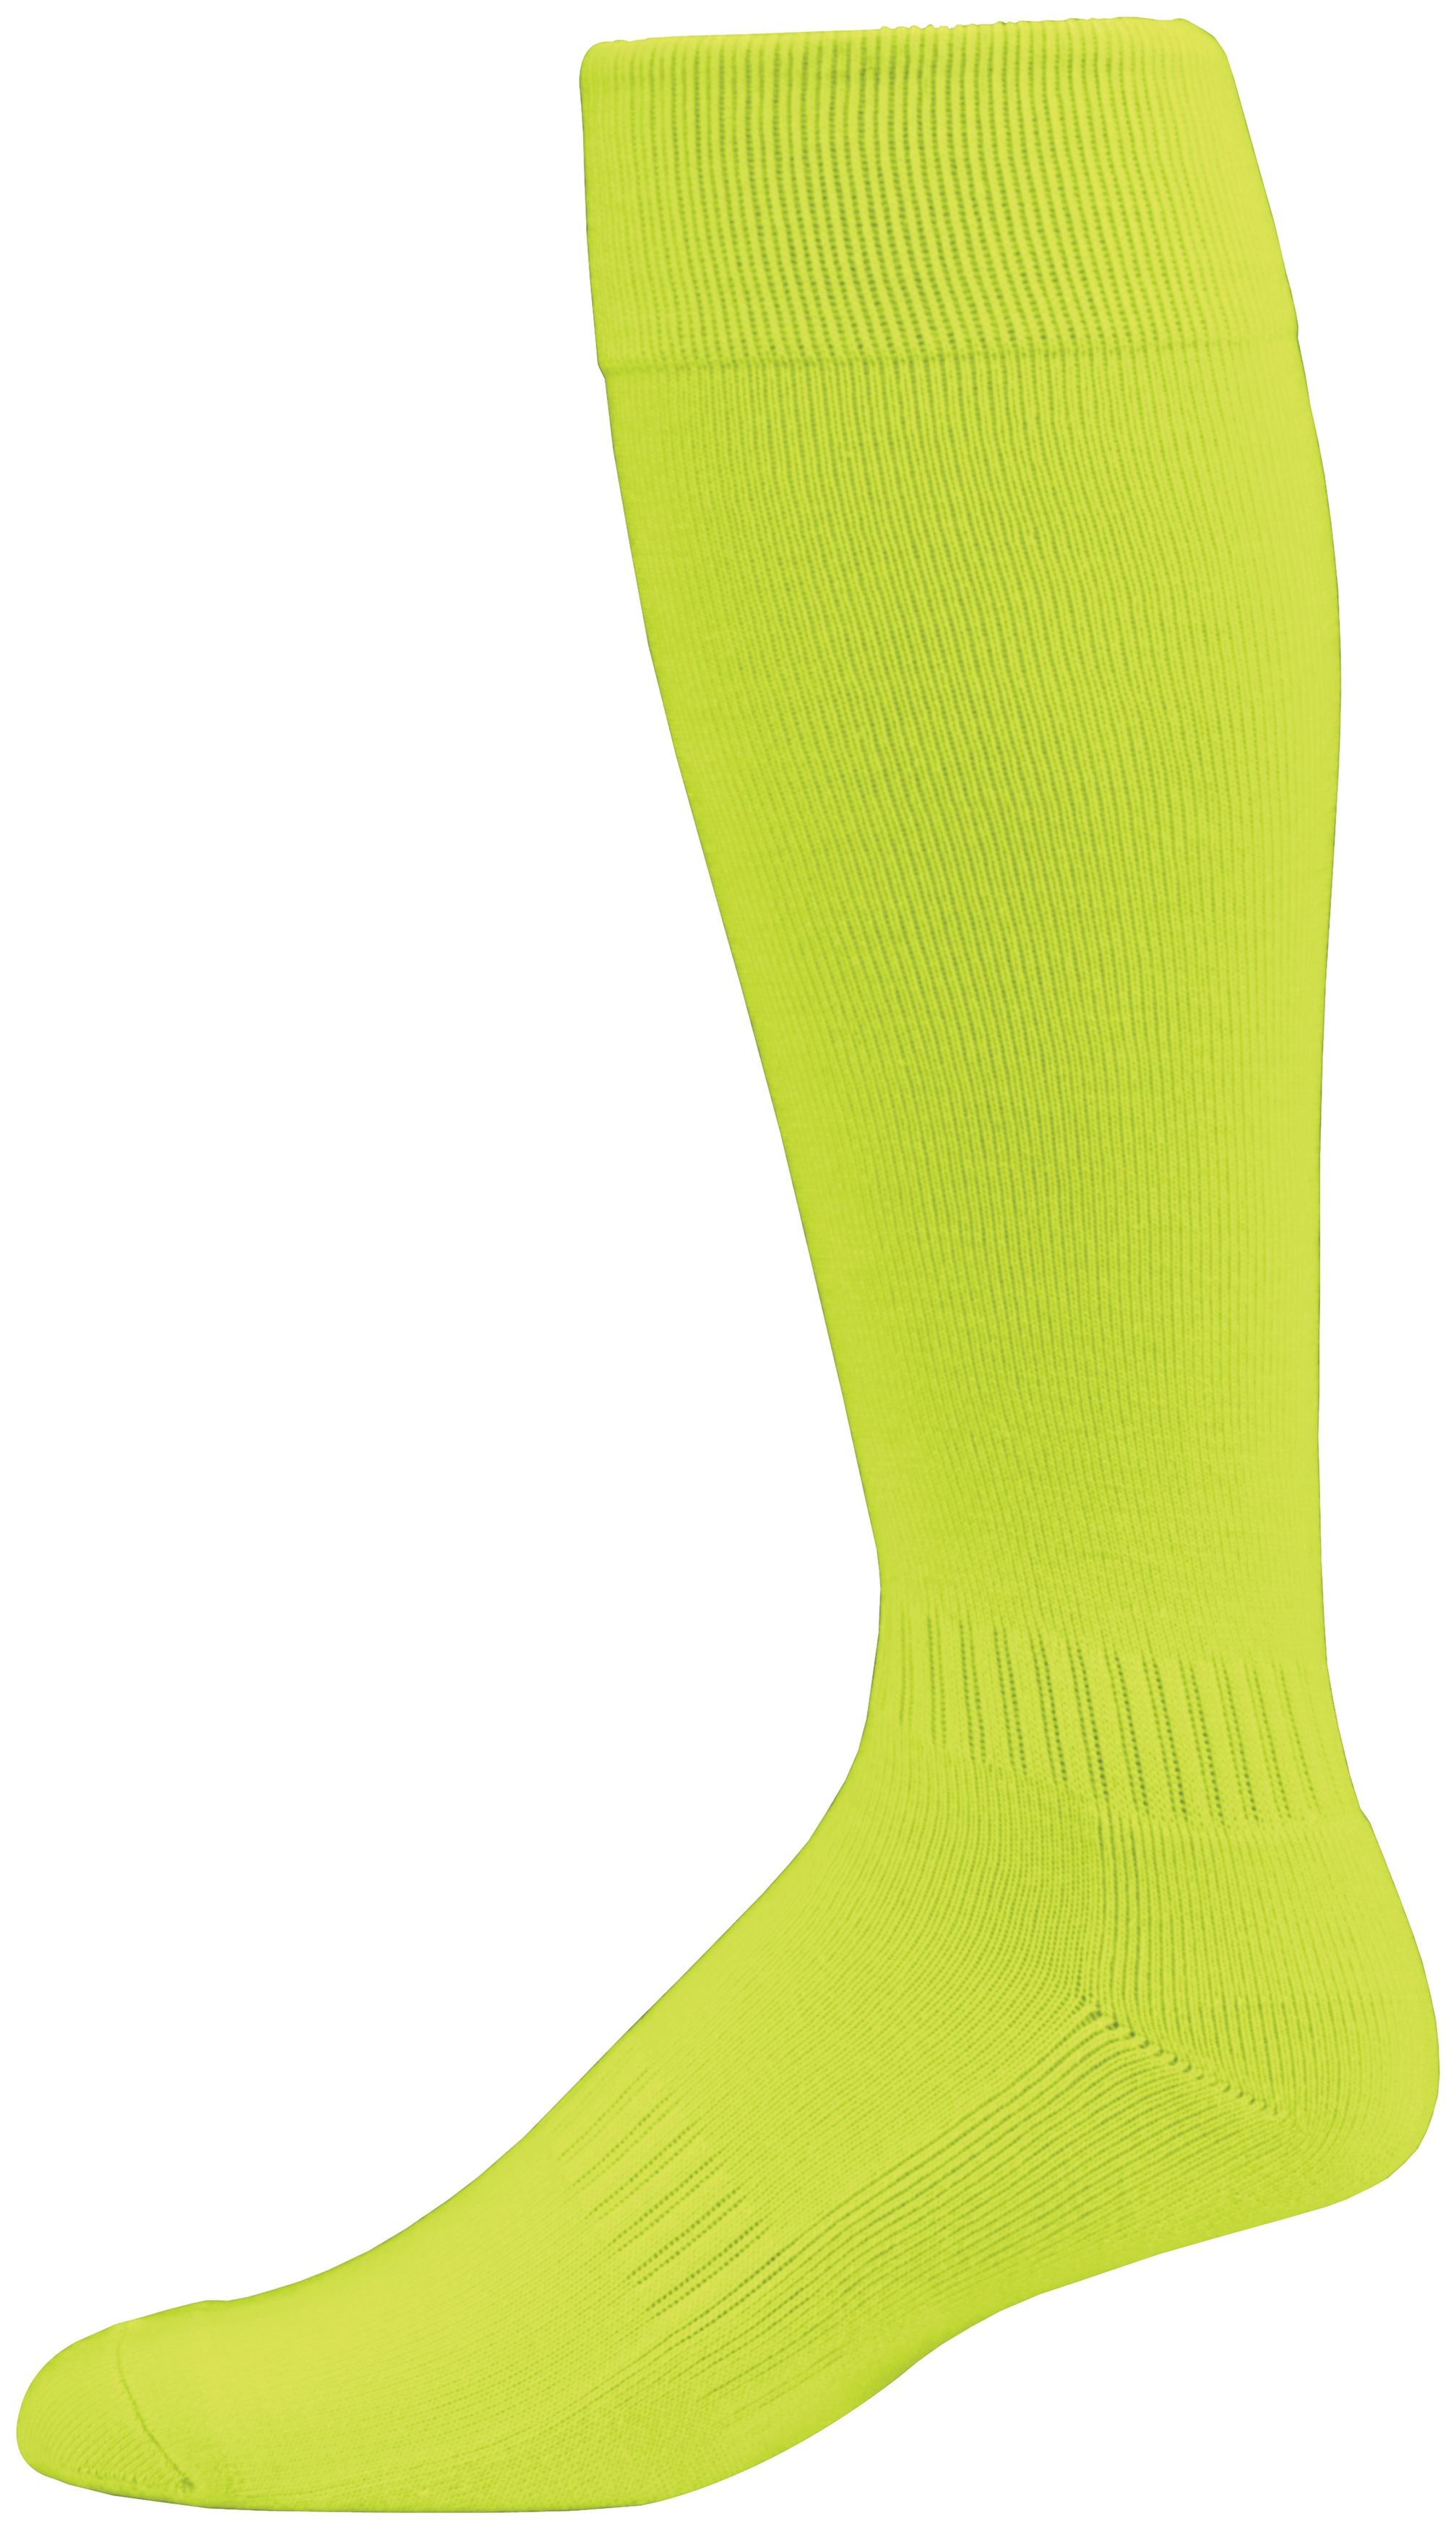 Augusta Sportswear Elite Multi-Sport Sock in Lime  -Part of the Accessories, Augusta-Products, Accessories-Socks product lines at KanaleyCreations.com